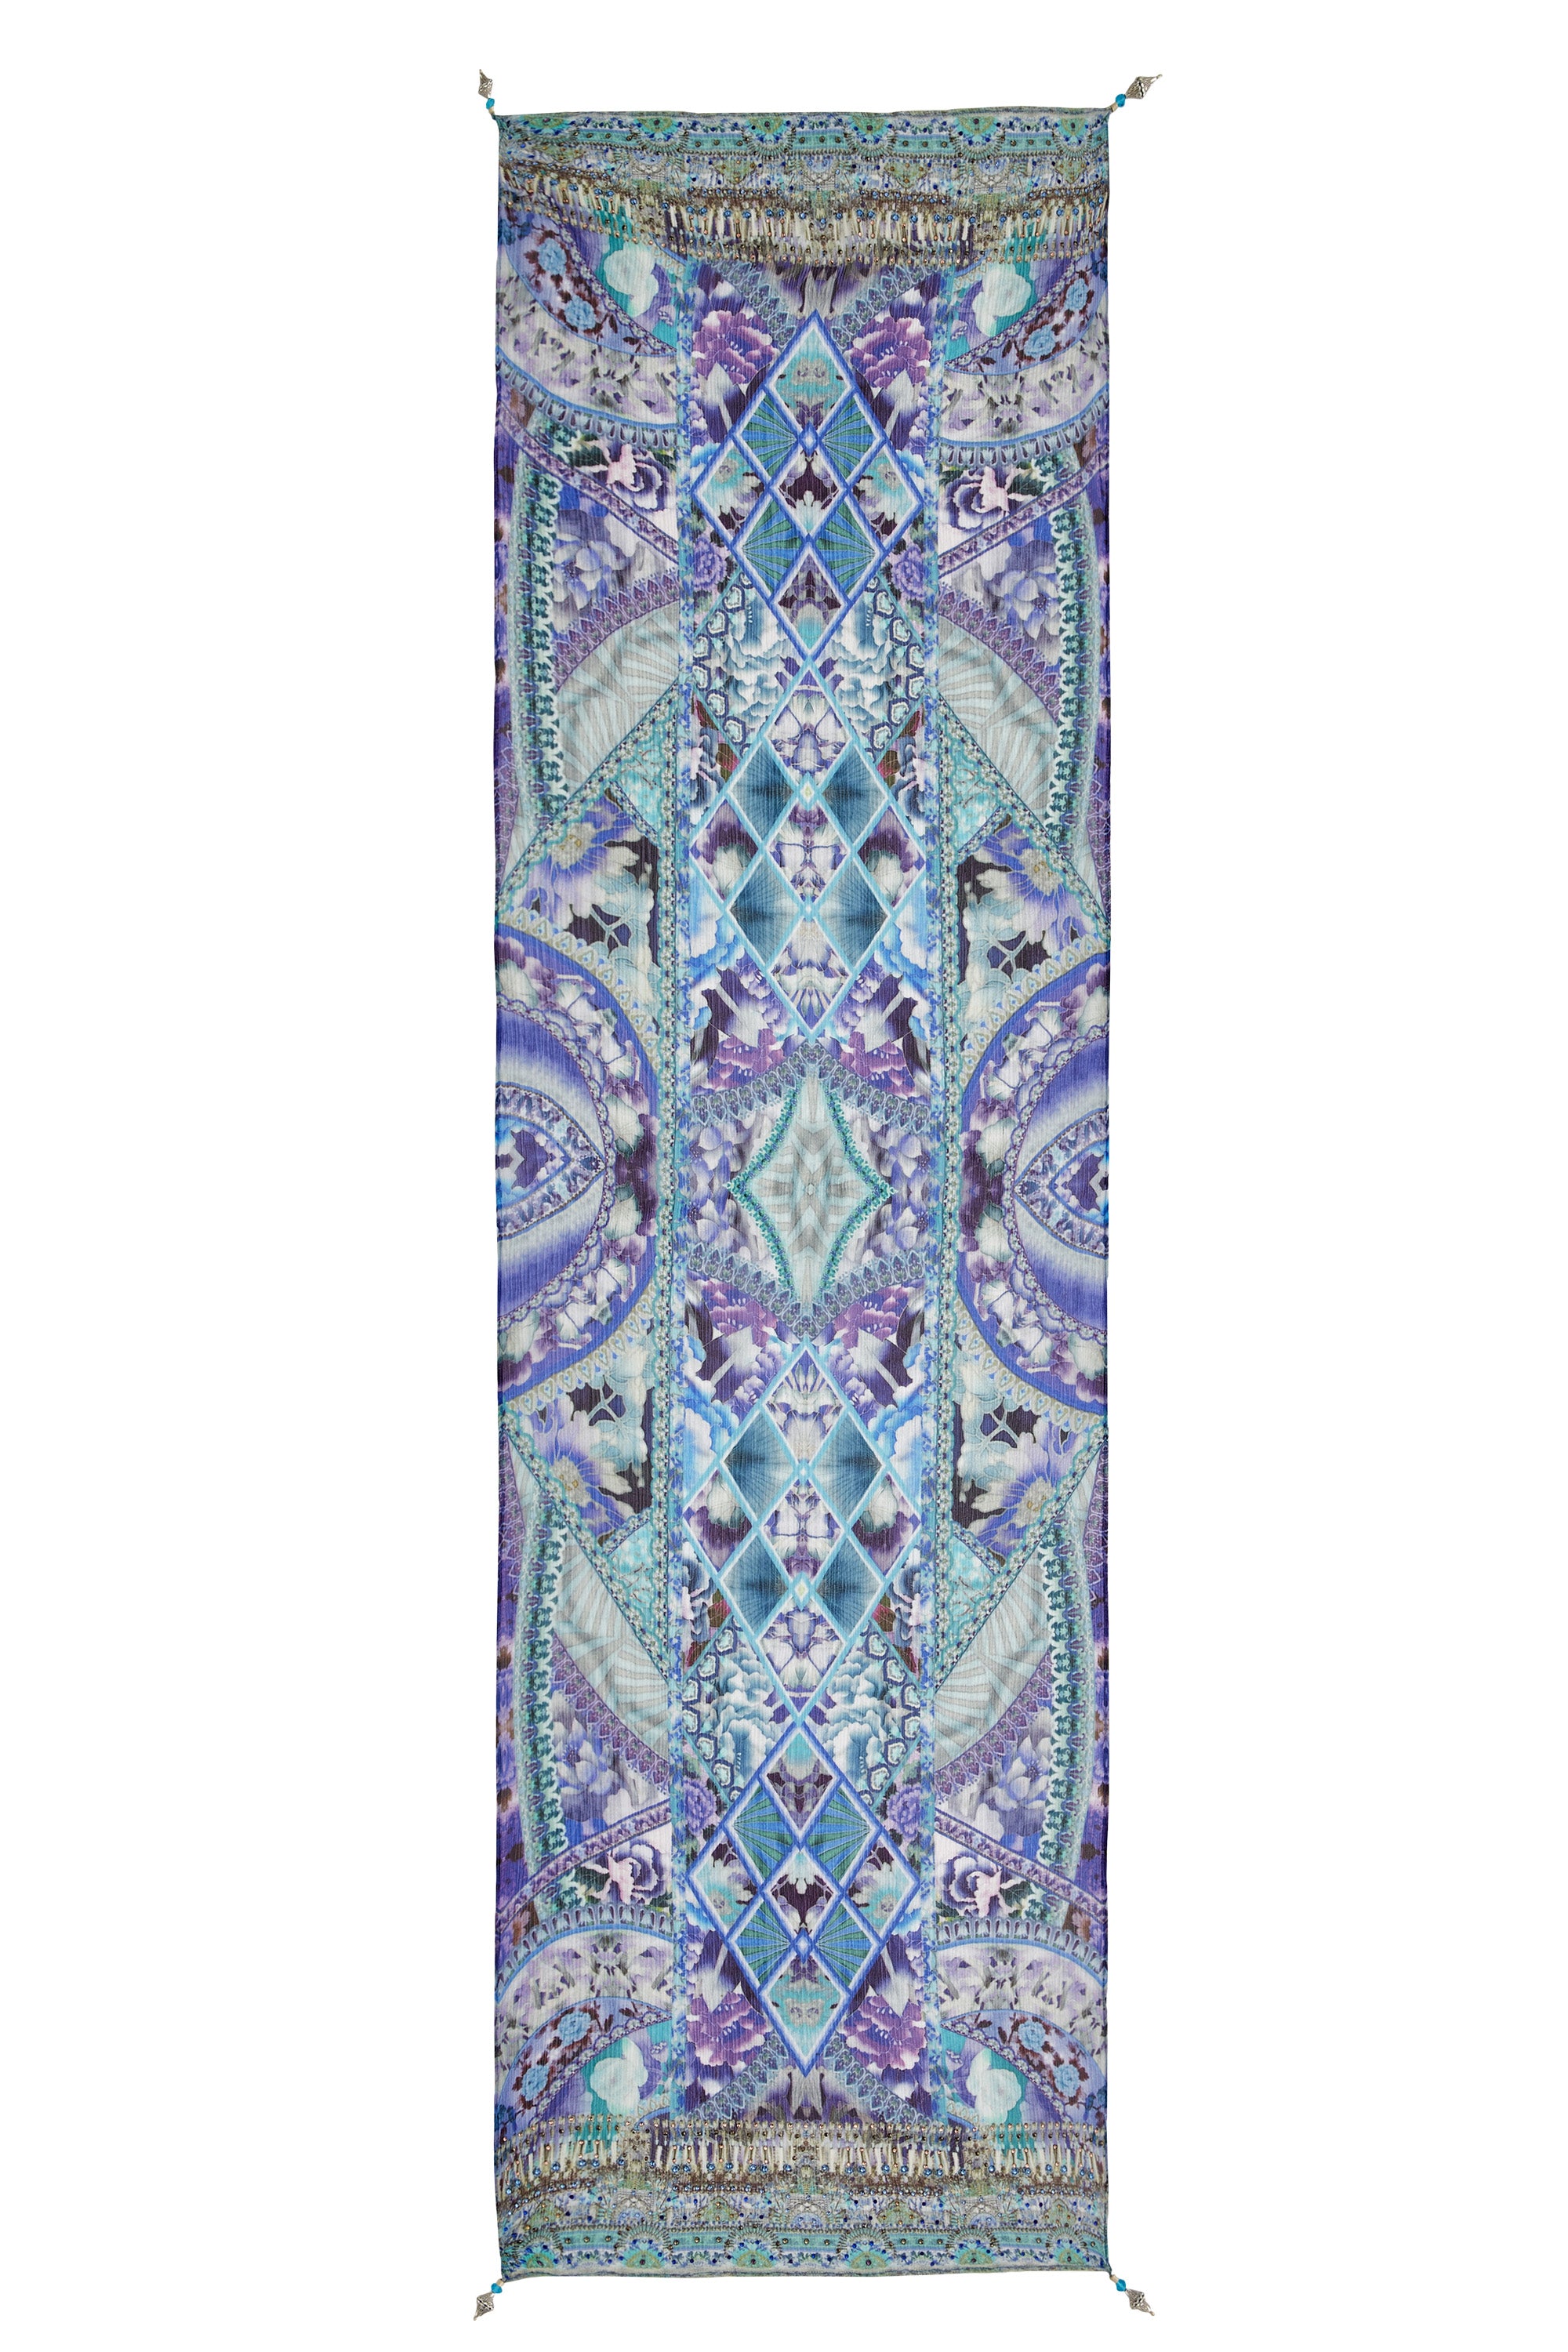 THE BLUE MARKET LONG SCARF